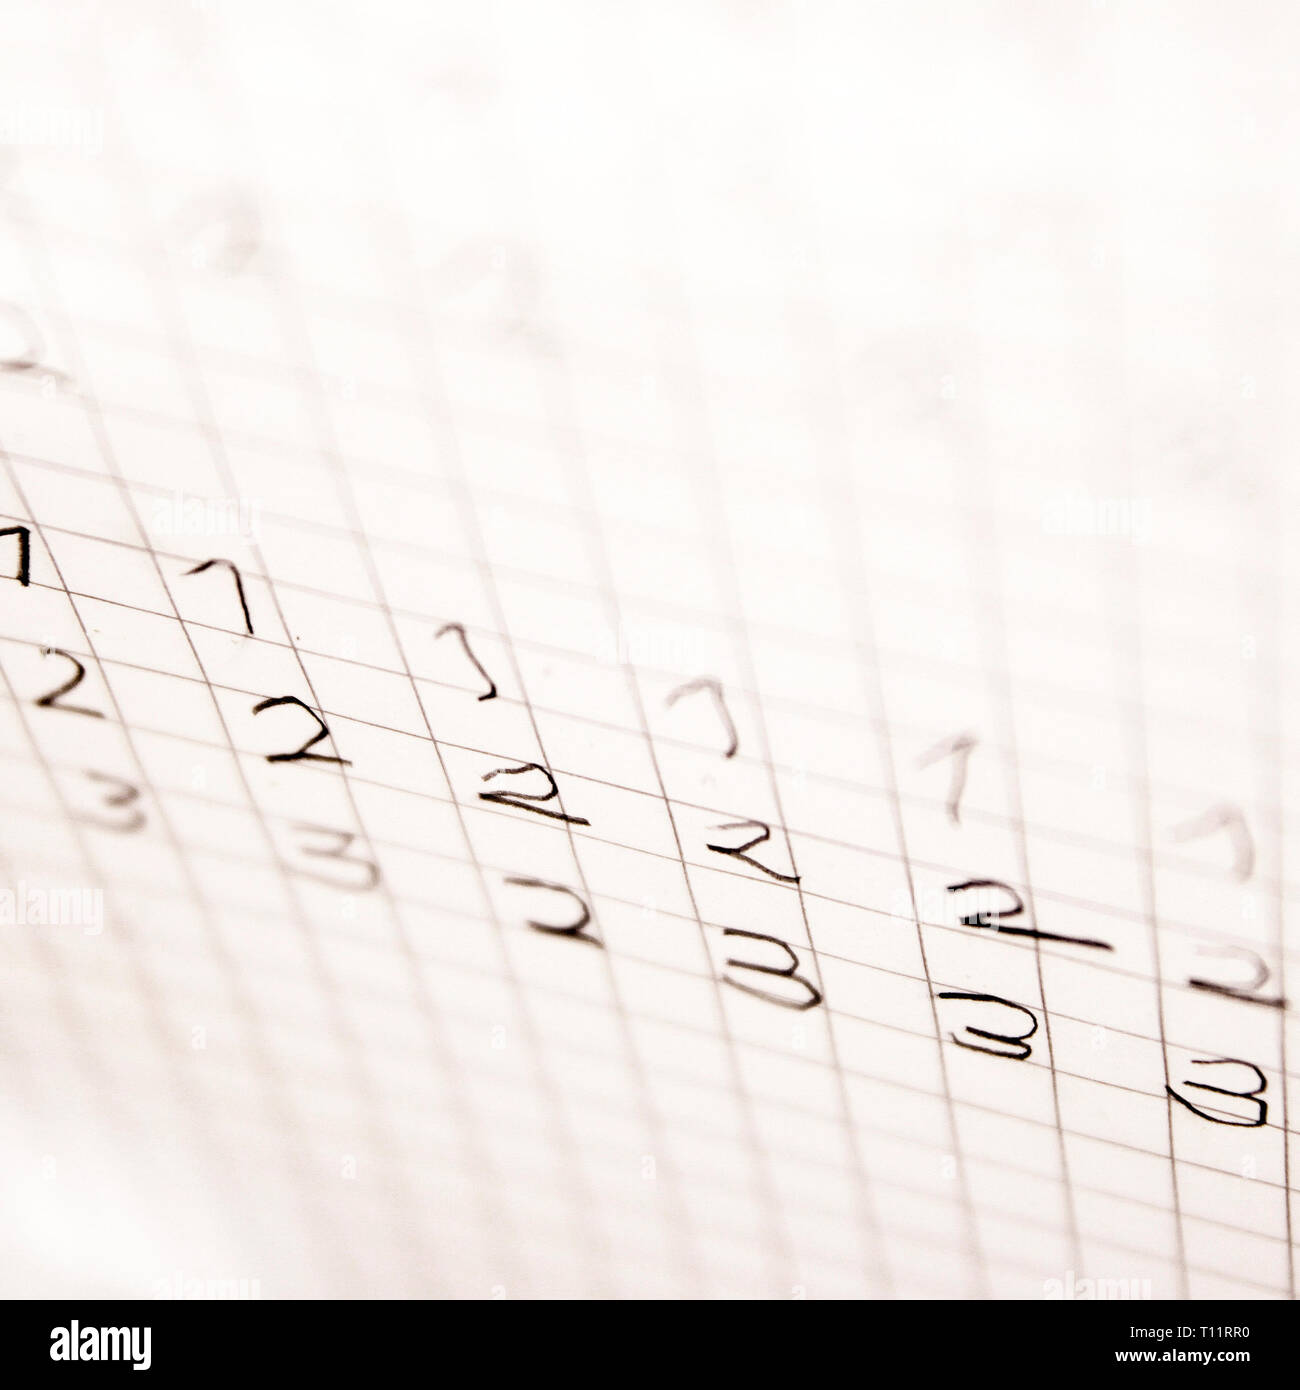 the numbers 1, 2, 3 written on an white paper Stock Photo